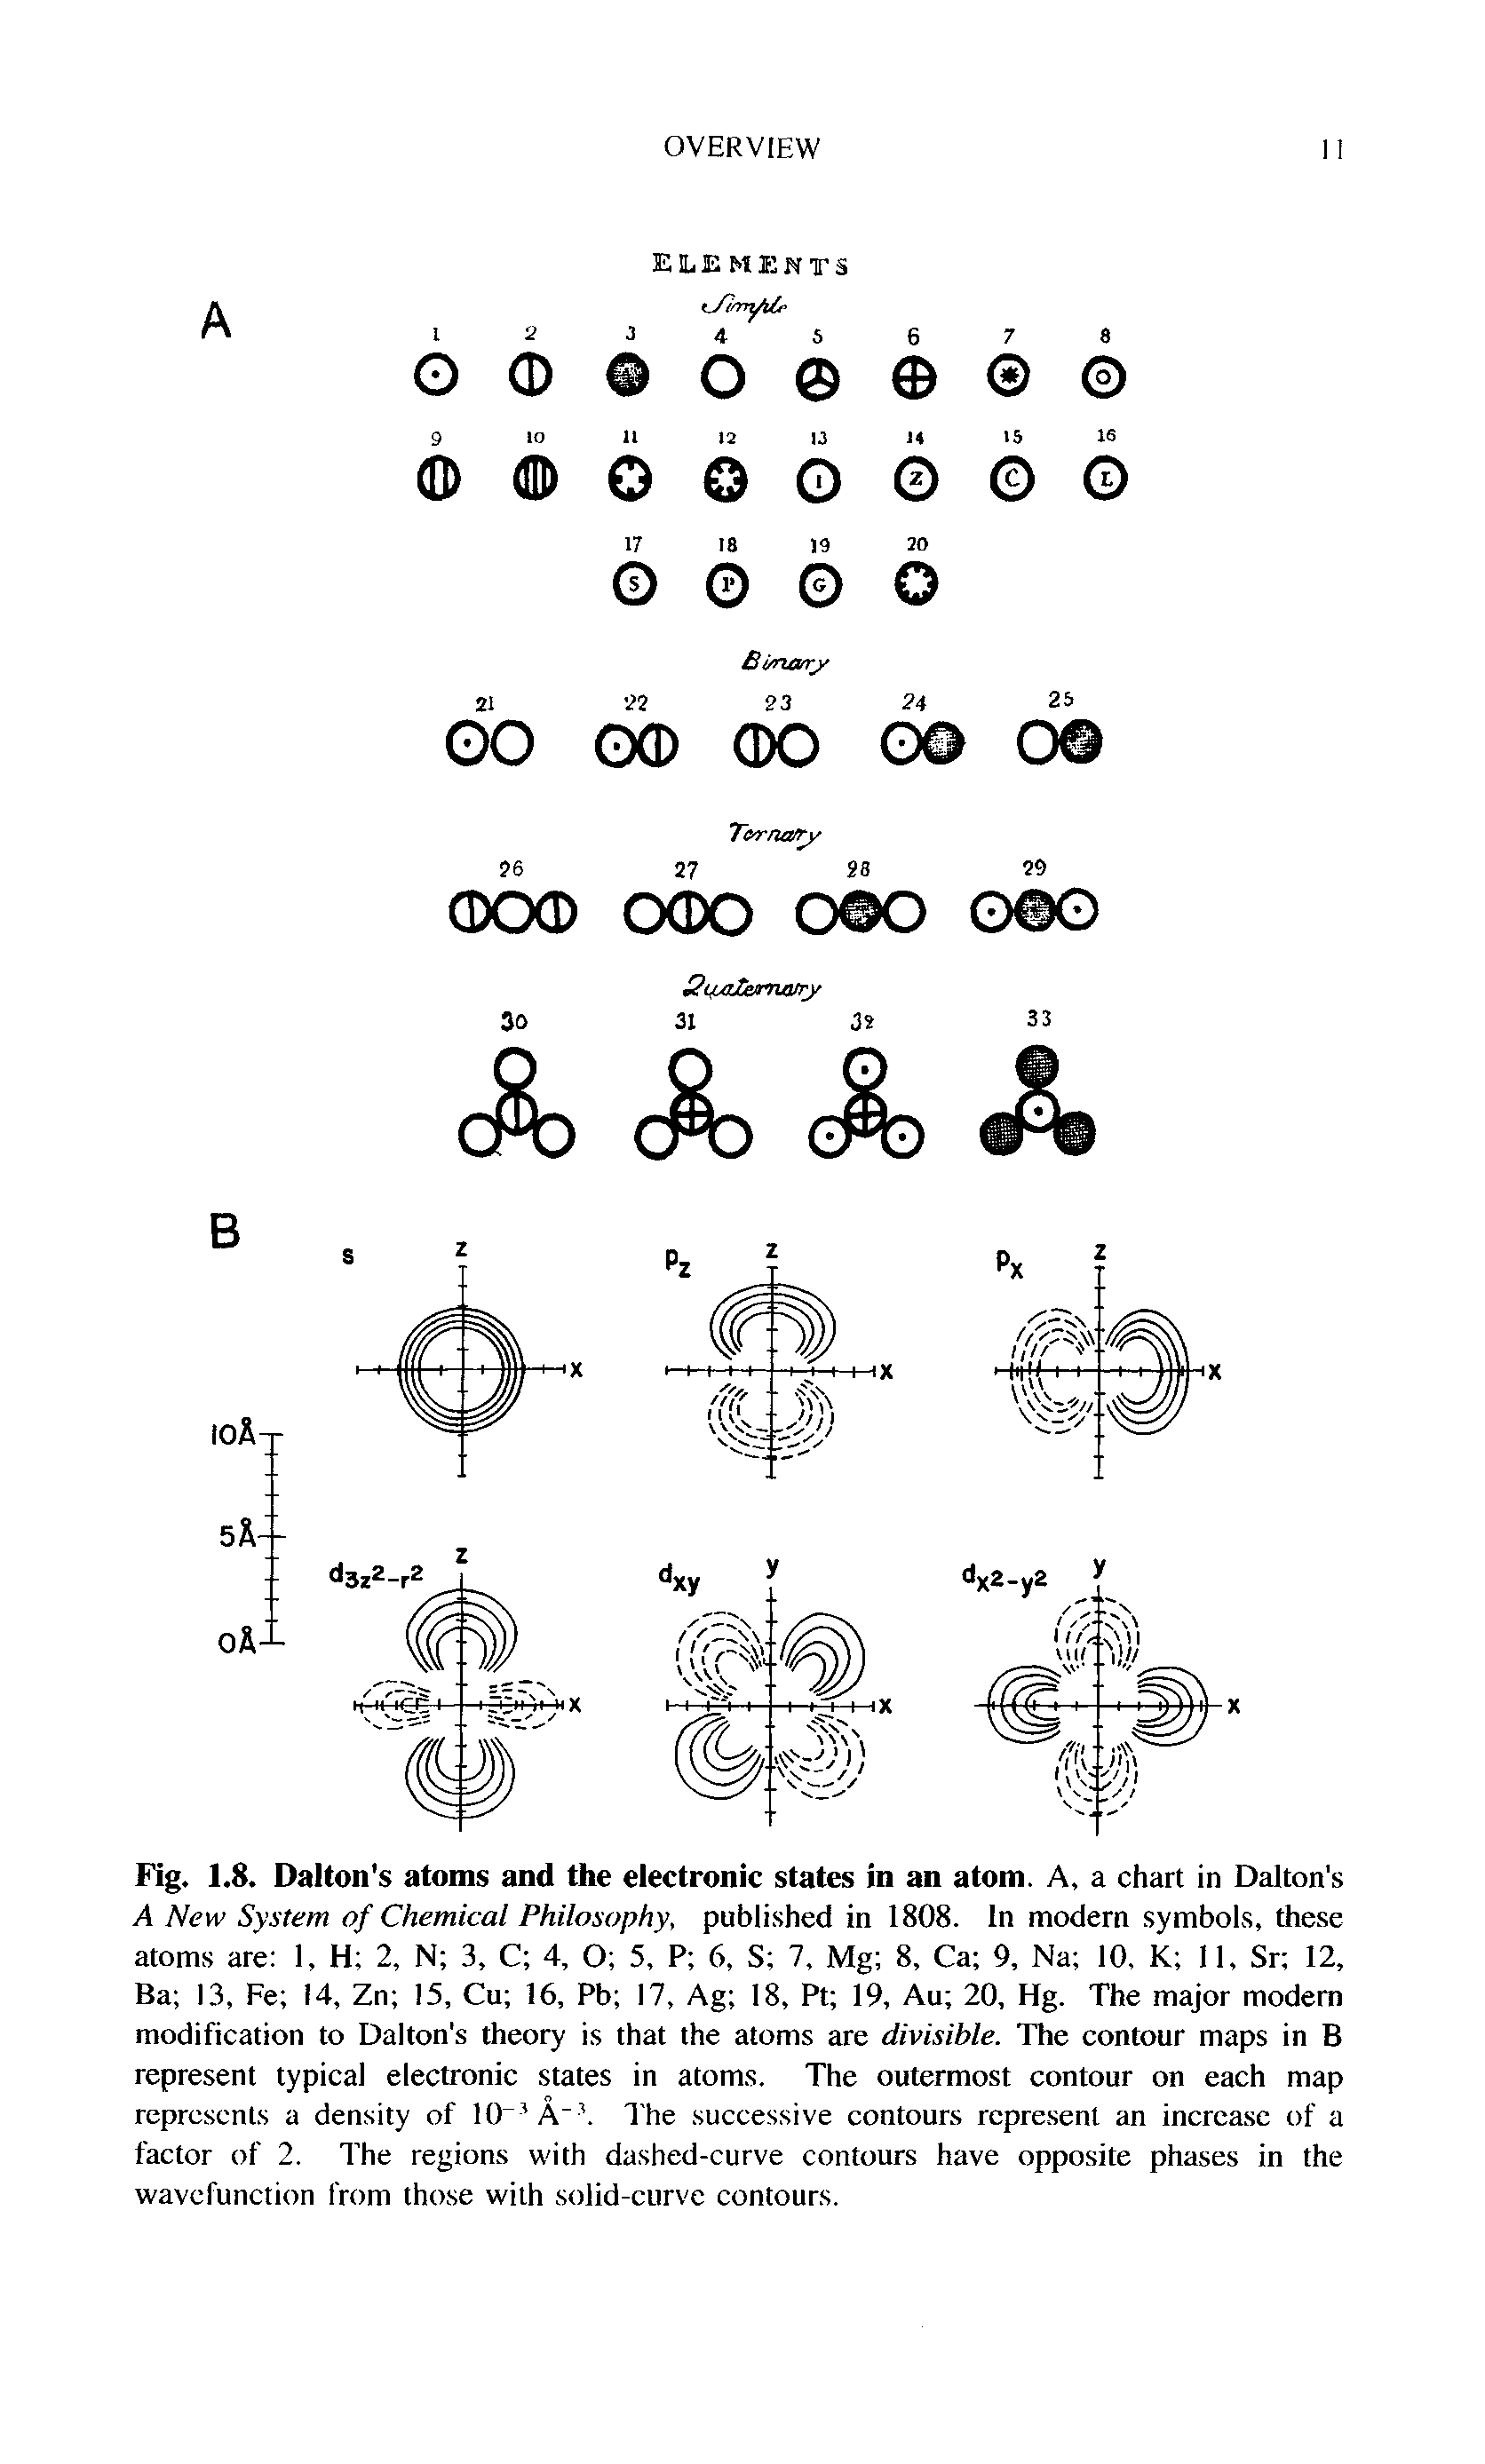 Fig. 1.8. Dalton s atoms and the electronic states in an atom. A, a chart in Dalton s A New System of Chemical Philosophy, published in 1808. In modern symbols, these atoms are 1, H 2, N 3, C 4, O 5, P 6, S 7, Mg 8, Ca 9, Na 10, K 11, Sr 12, Ba 13, Fe 14, Zn 15, Cu 16, Pb 17, Ag 18, Pt 19, Au 20, Hg. The major modem modification to Dalton s theory is that the atoms are divisible. The contour maps in B represent typical electronic states in atoms. The outermost contour on each map represents a density of 10 A The successive contours rcpre.sent an increase of a factor of 2. The regions with dashed-curve contours have opposite phases in the wavefunction from those with solid-curve contours.